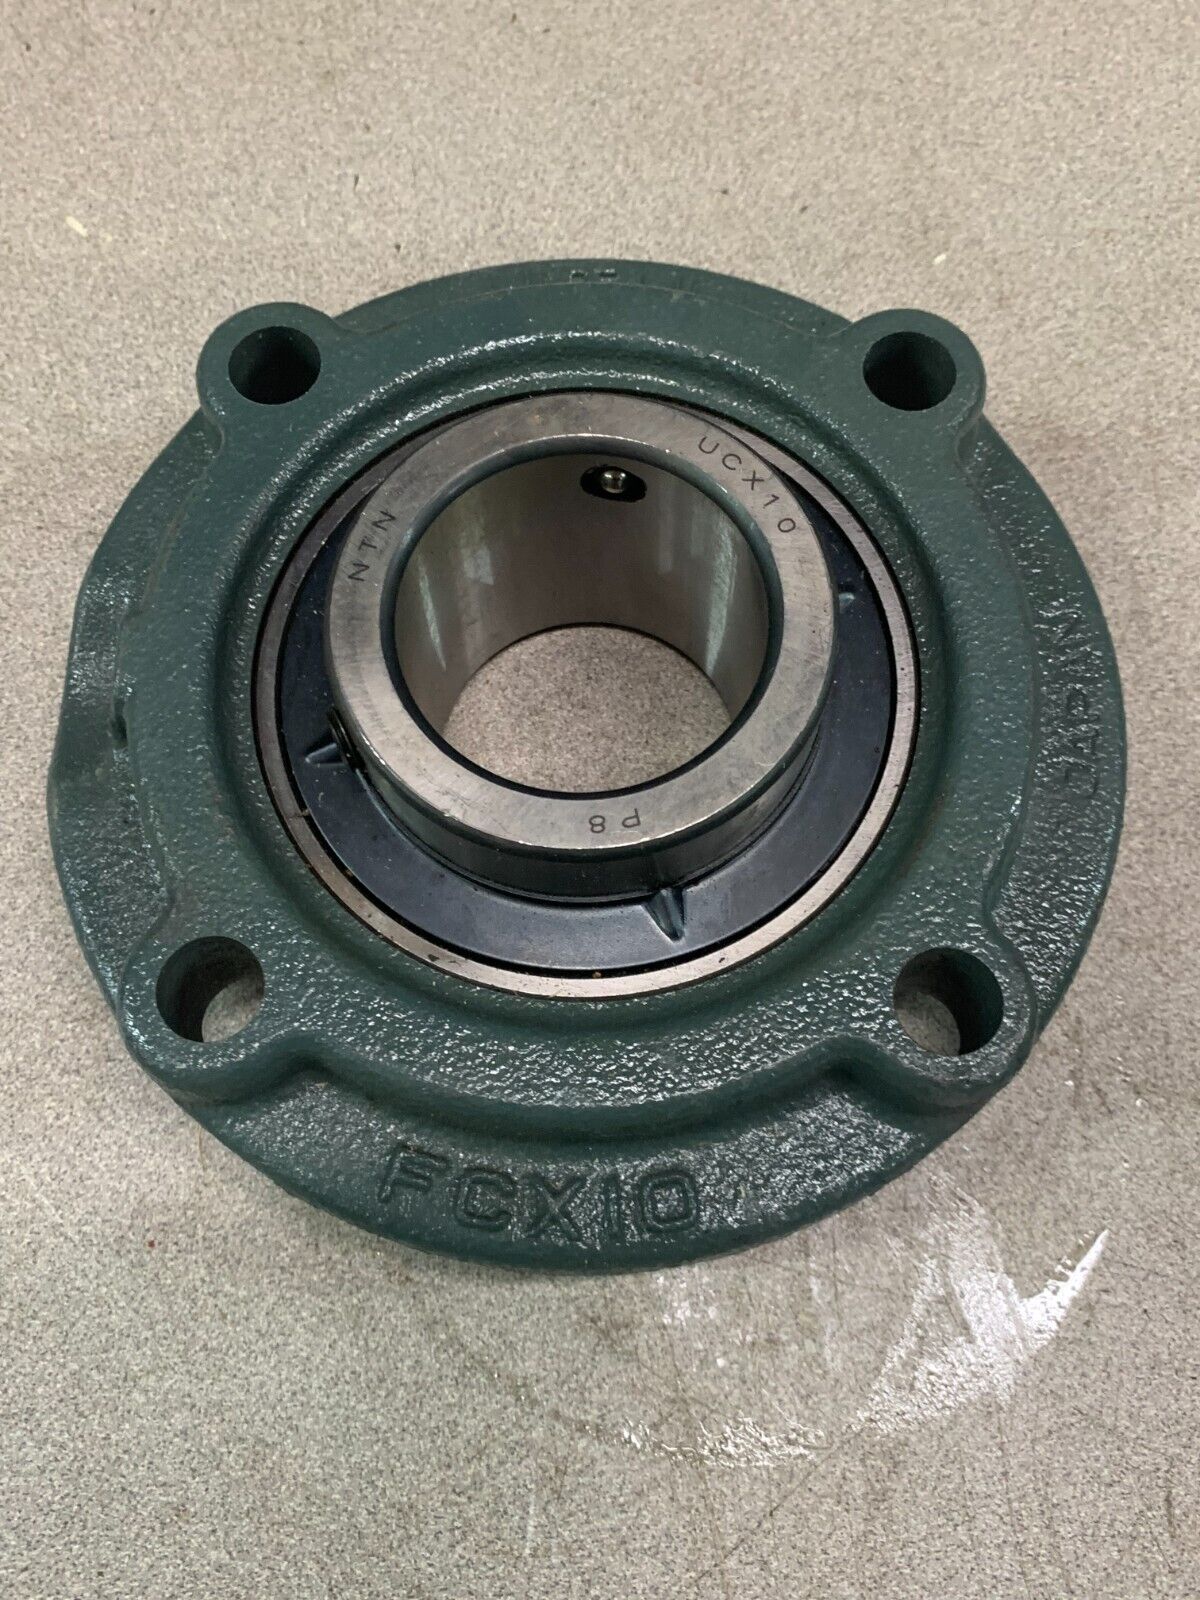 NEW NO BOX NTN 4-BOLT SPHERICAL FLANGE BEARING FCX10 WITH UCX10 INSERT